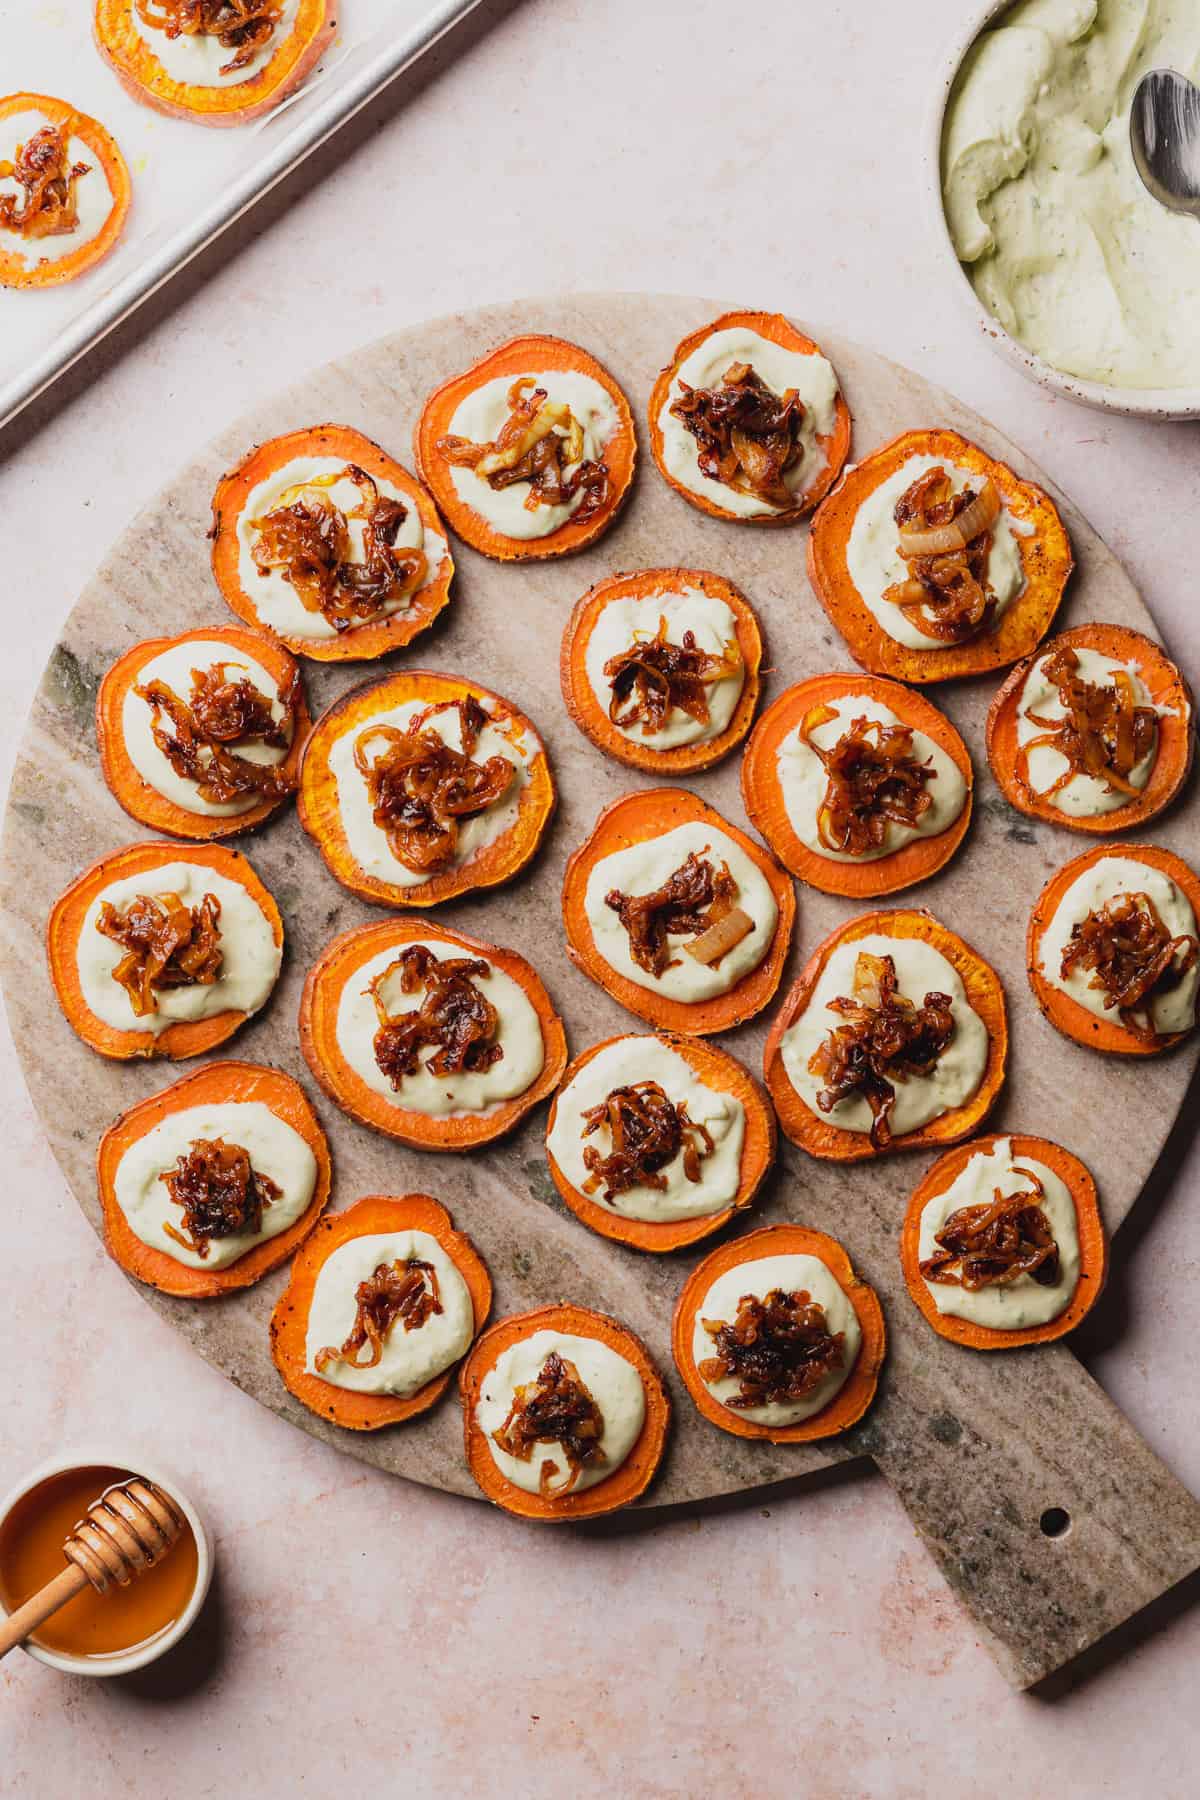 sweet potato rounds with cheese sauce, and caramelized onions